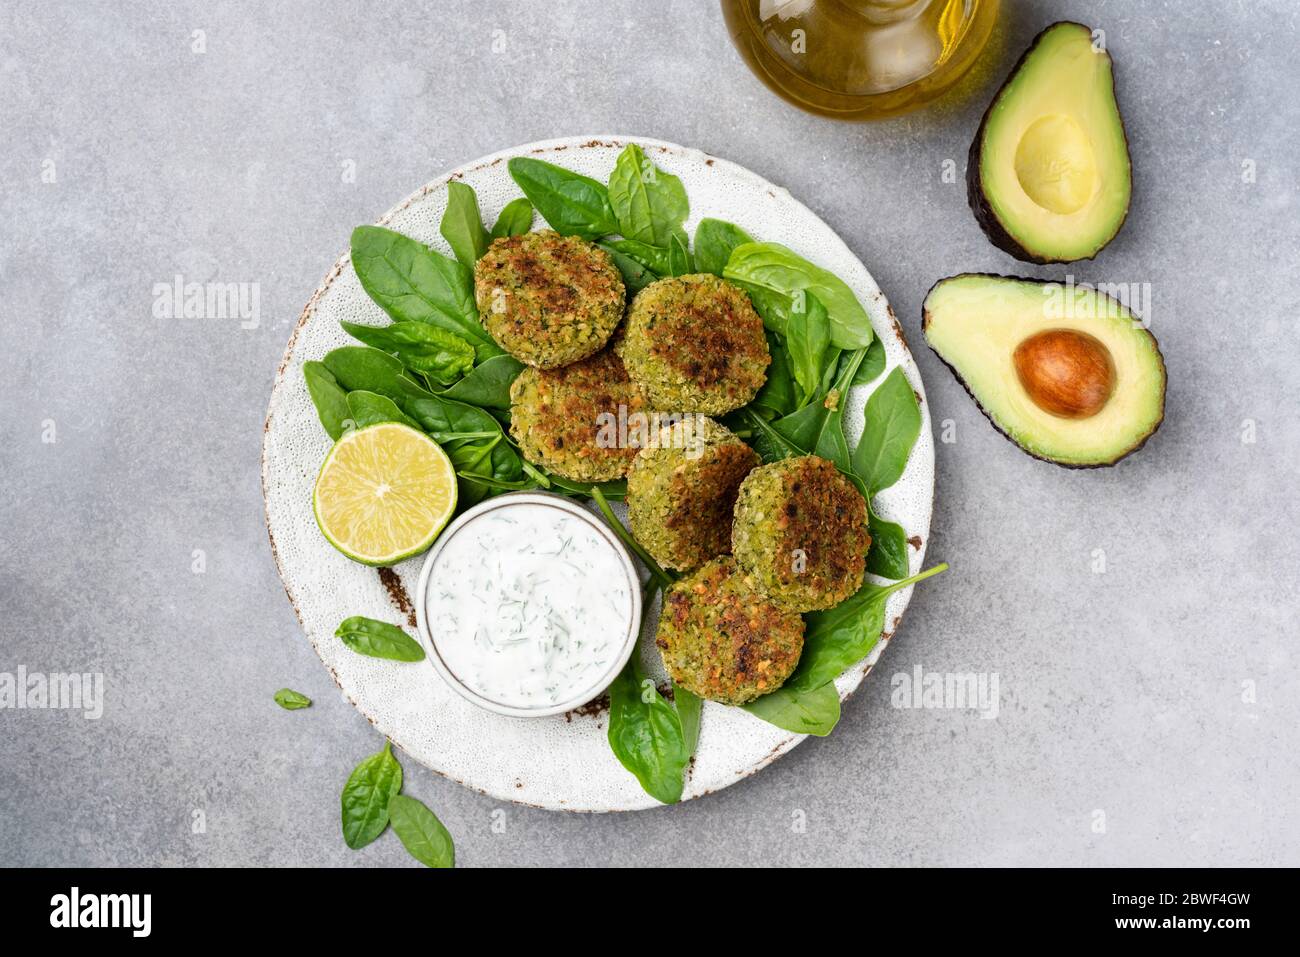 Falafel with yogurt sauce. Vegetarian spinach avocado chickpea fritters Falafel served with yogurt sauce on plate. Top view. Healthy vegetarian food Stock Photo